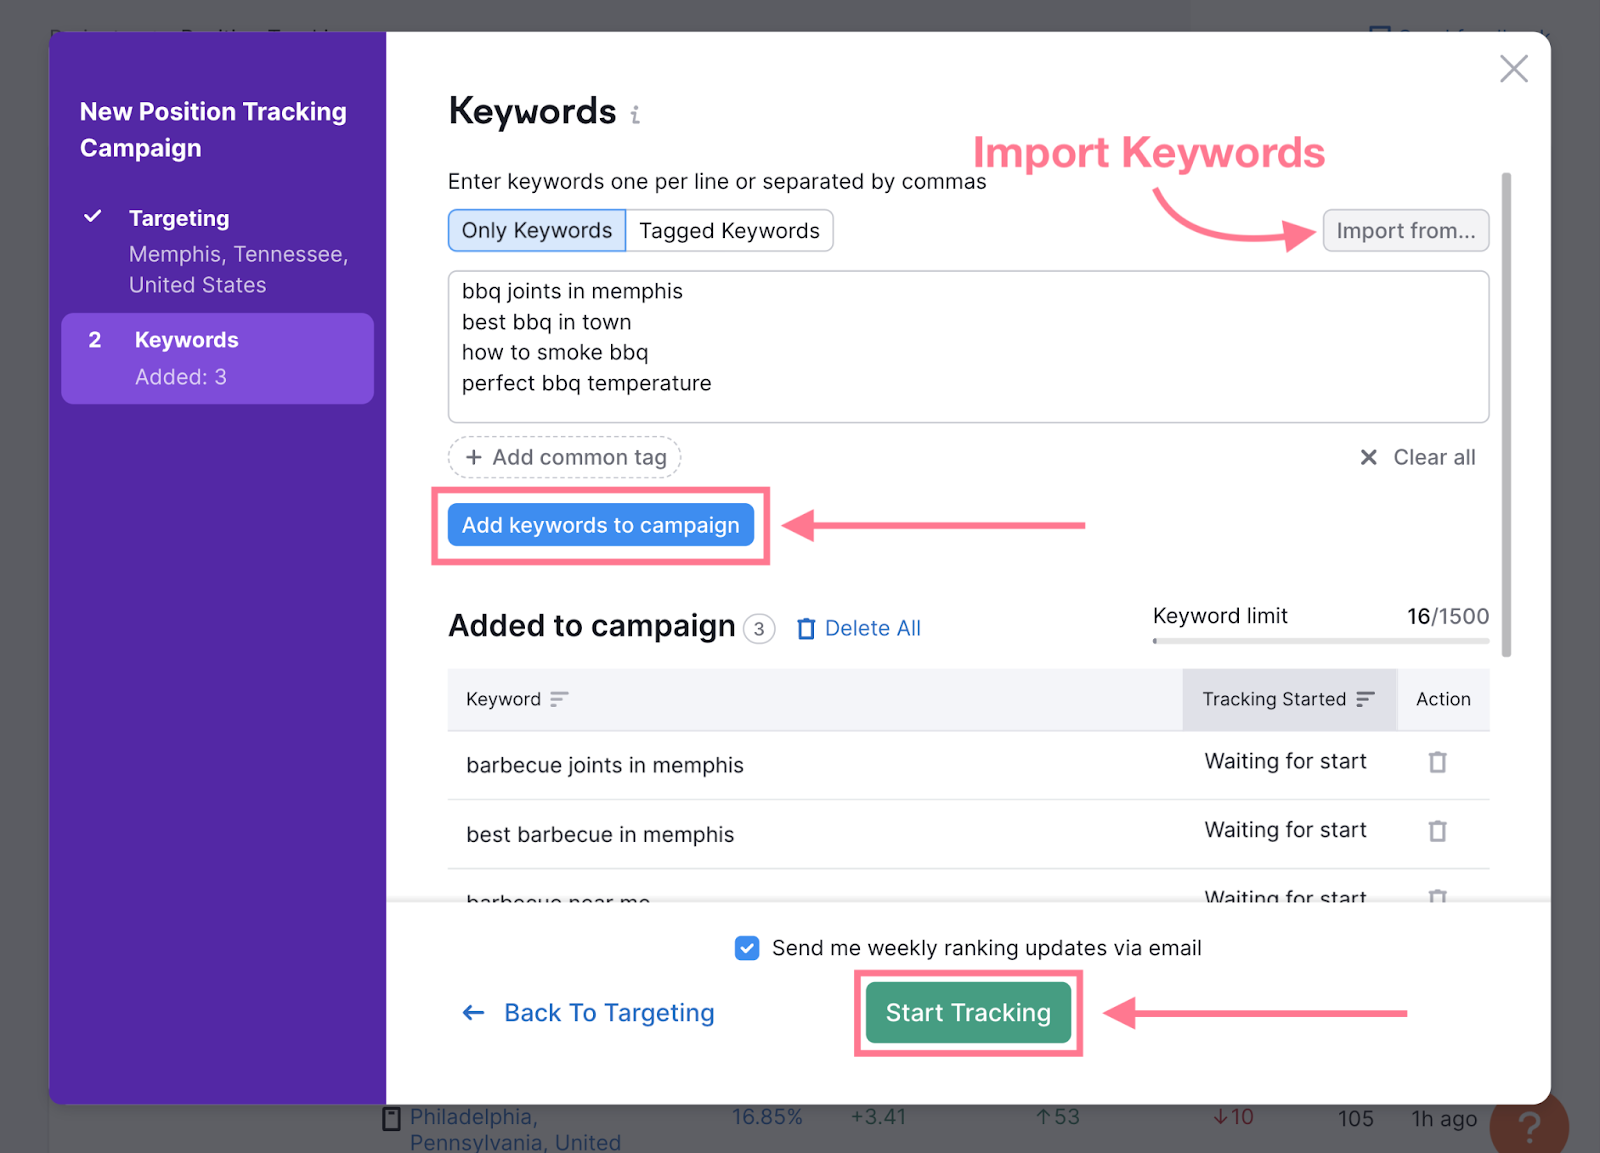 Add keywords to campaign and start tracking